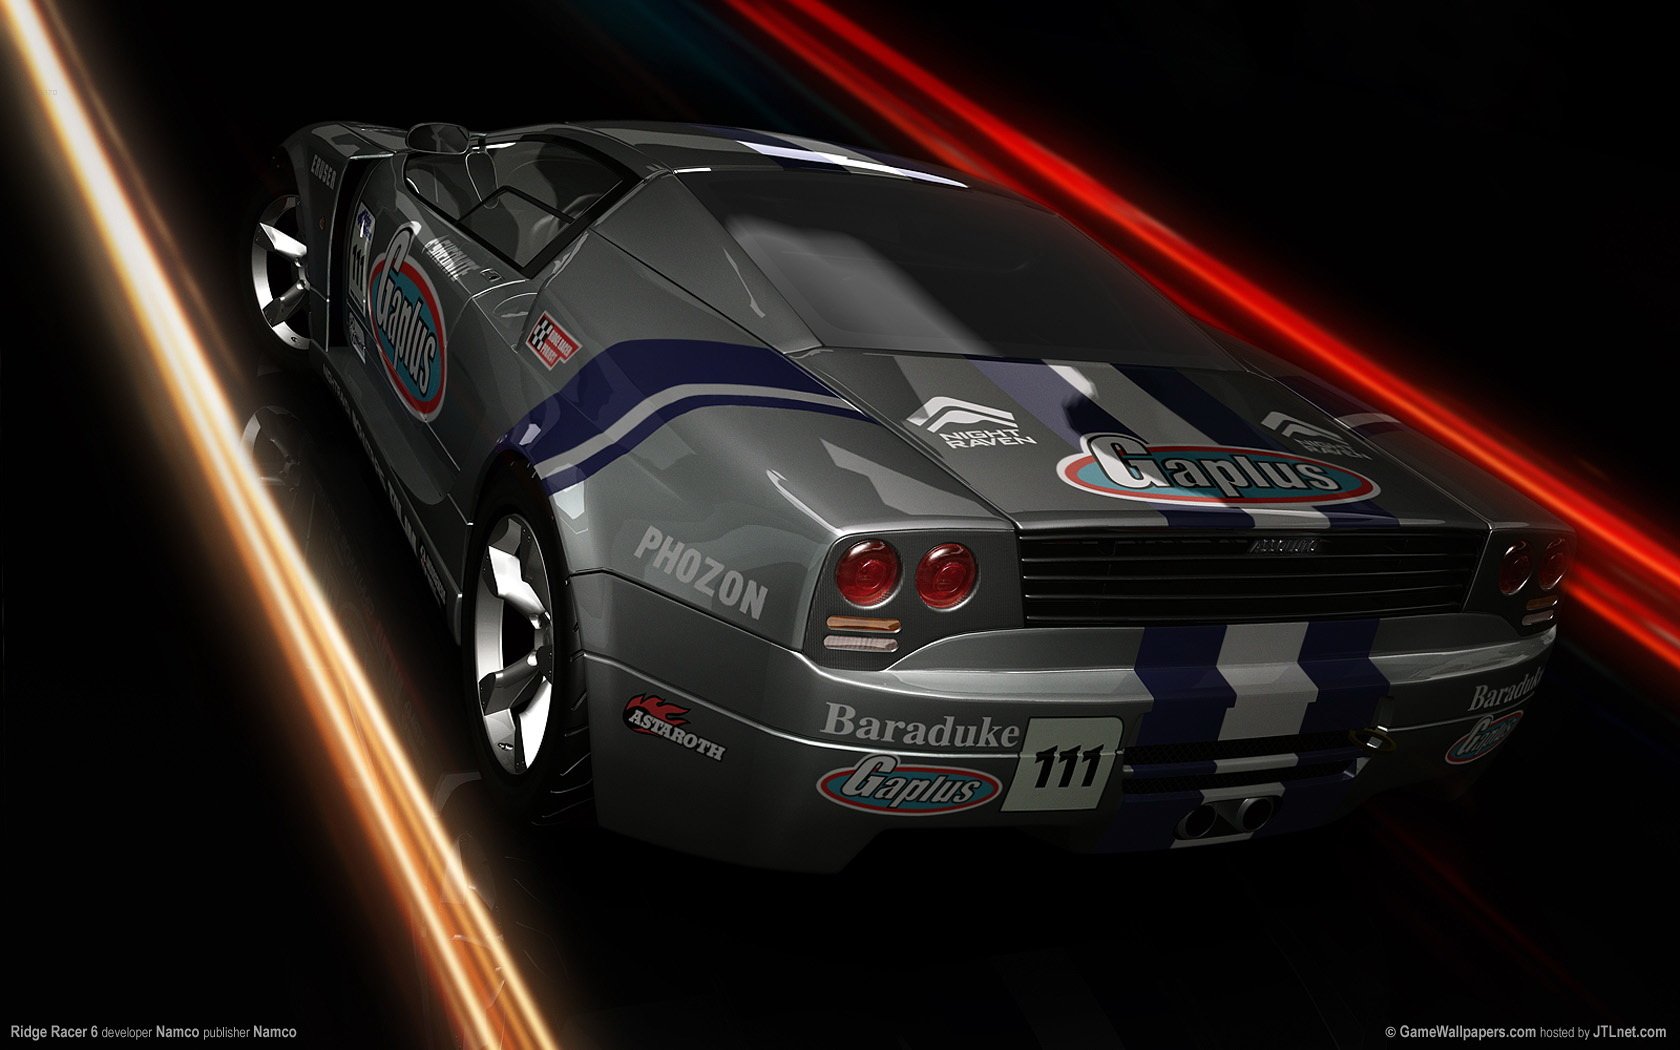 Ridge Racer 6 Wallpaper and Background Image 1680x1050 1680x1050